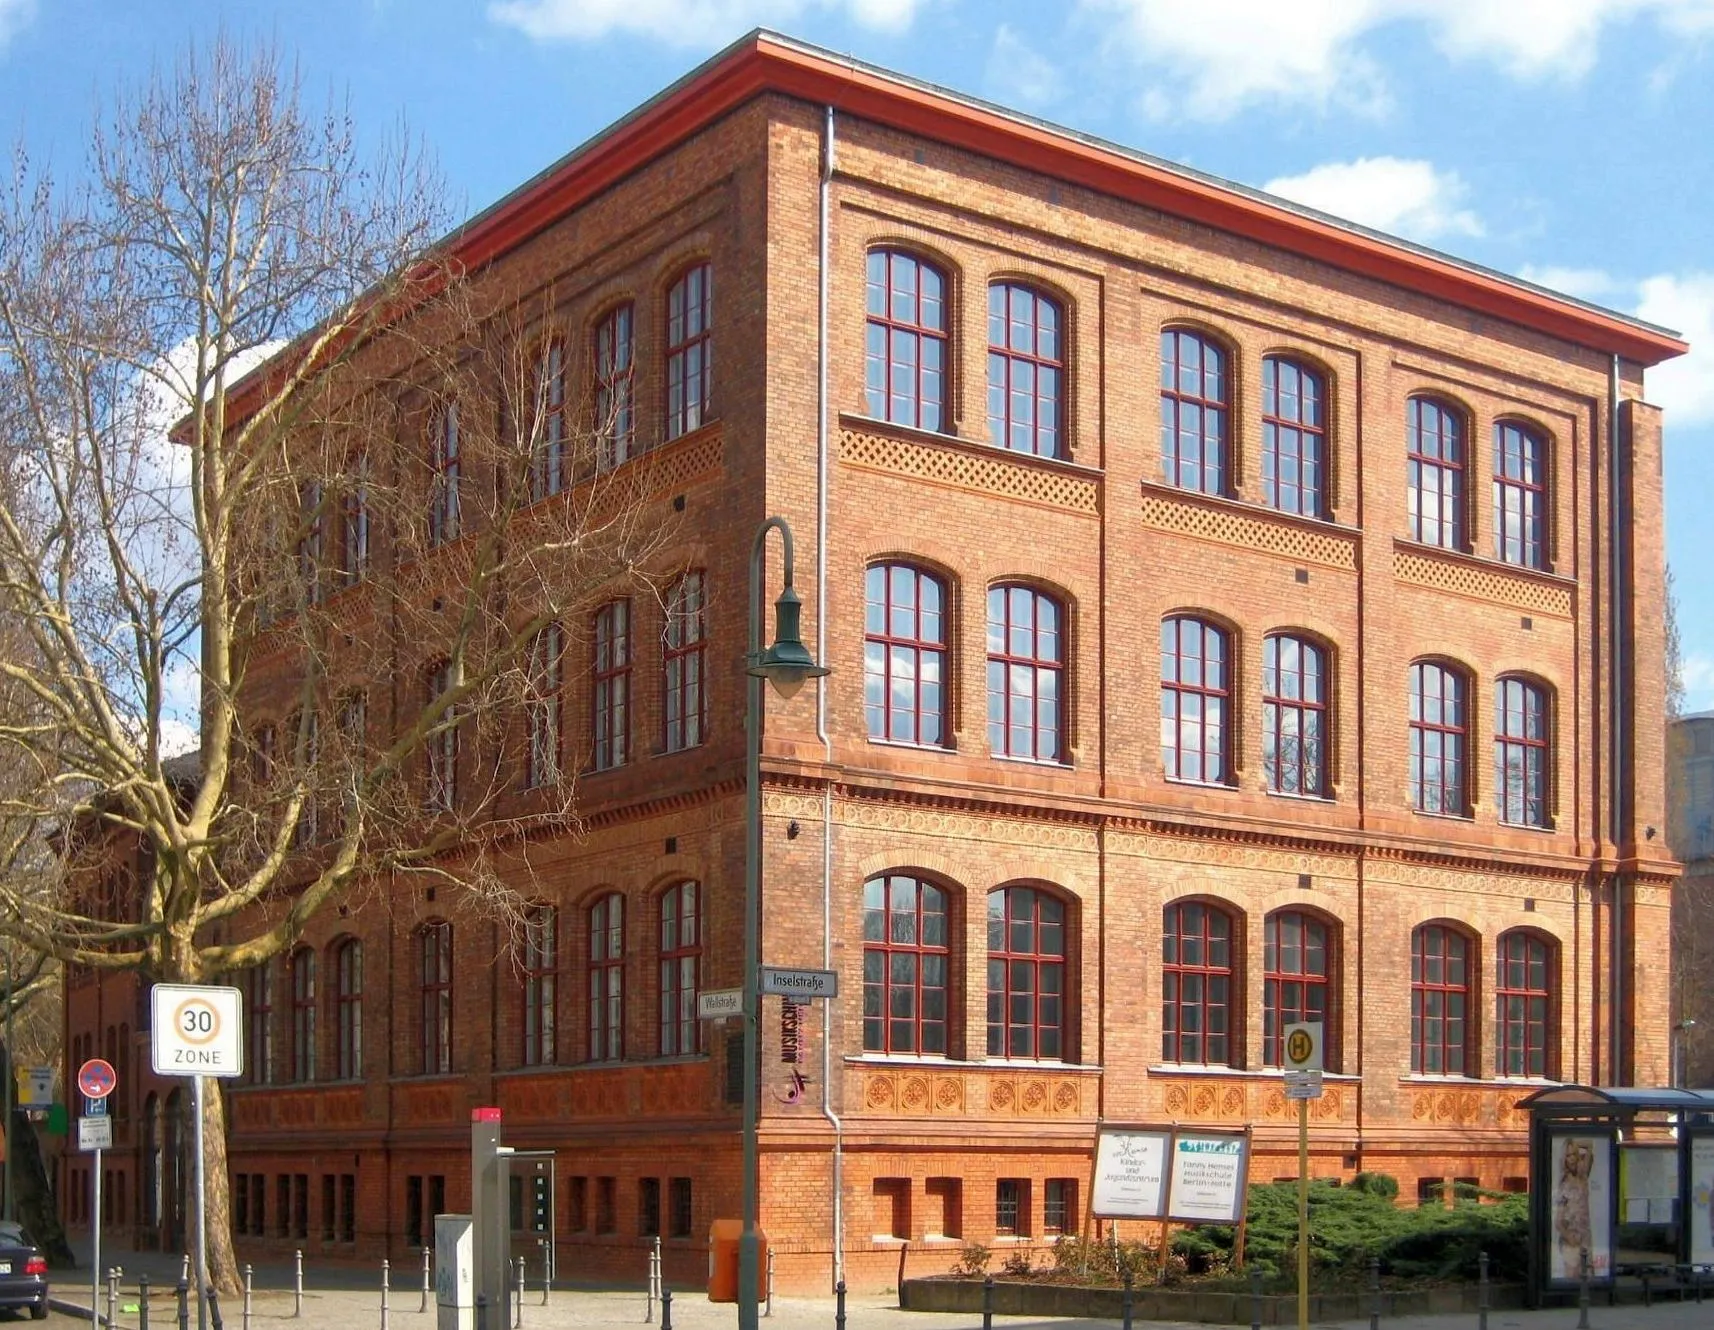 Photo showing: The former Köllnisches Gymnasium (=secondary school) at Wallstraße 42-48, built 1865 by Adolf Gerstenberg, as seen from the corner of Wallstraße and Inselstraße. It used to be a school building with three wings along Inselstraße. After destruction in WWII, only the northern wing along Wallstraße as well as the principal's building, added in 1868 on the same street, are preserved. The buildings are used today by the Music School Fanny Hensel. They have been desiganted as a historic landmark.